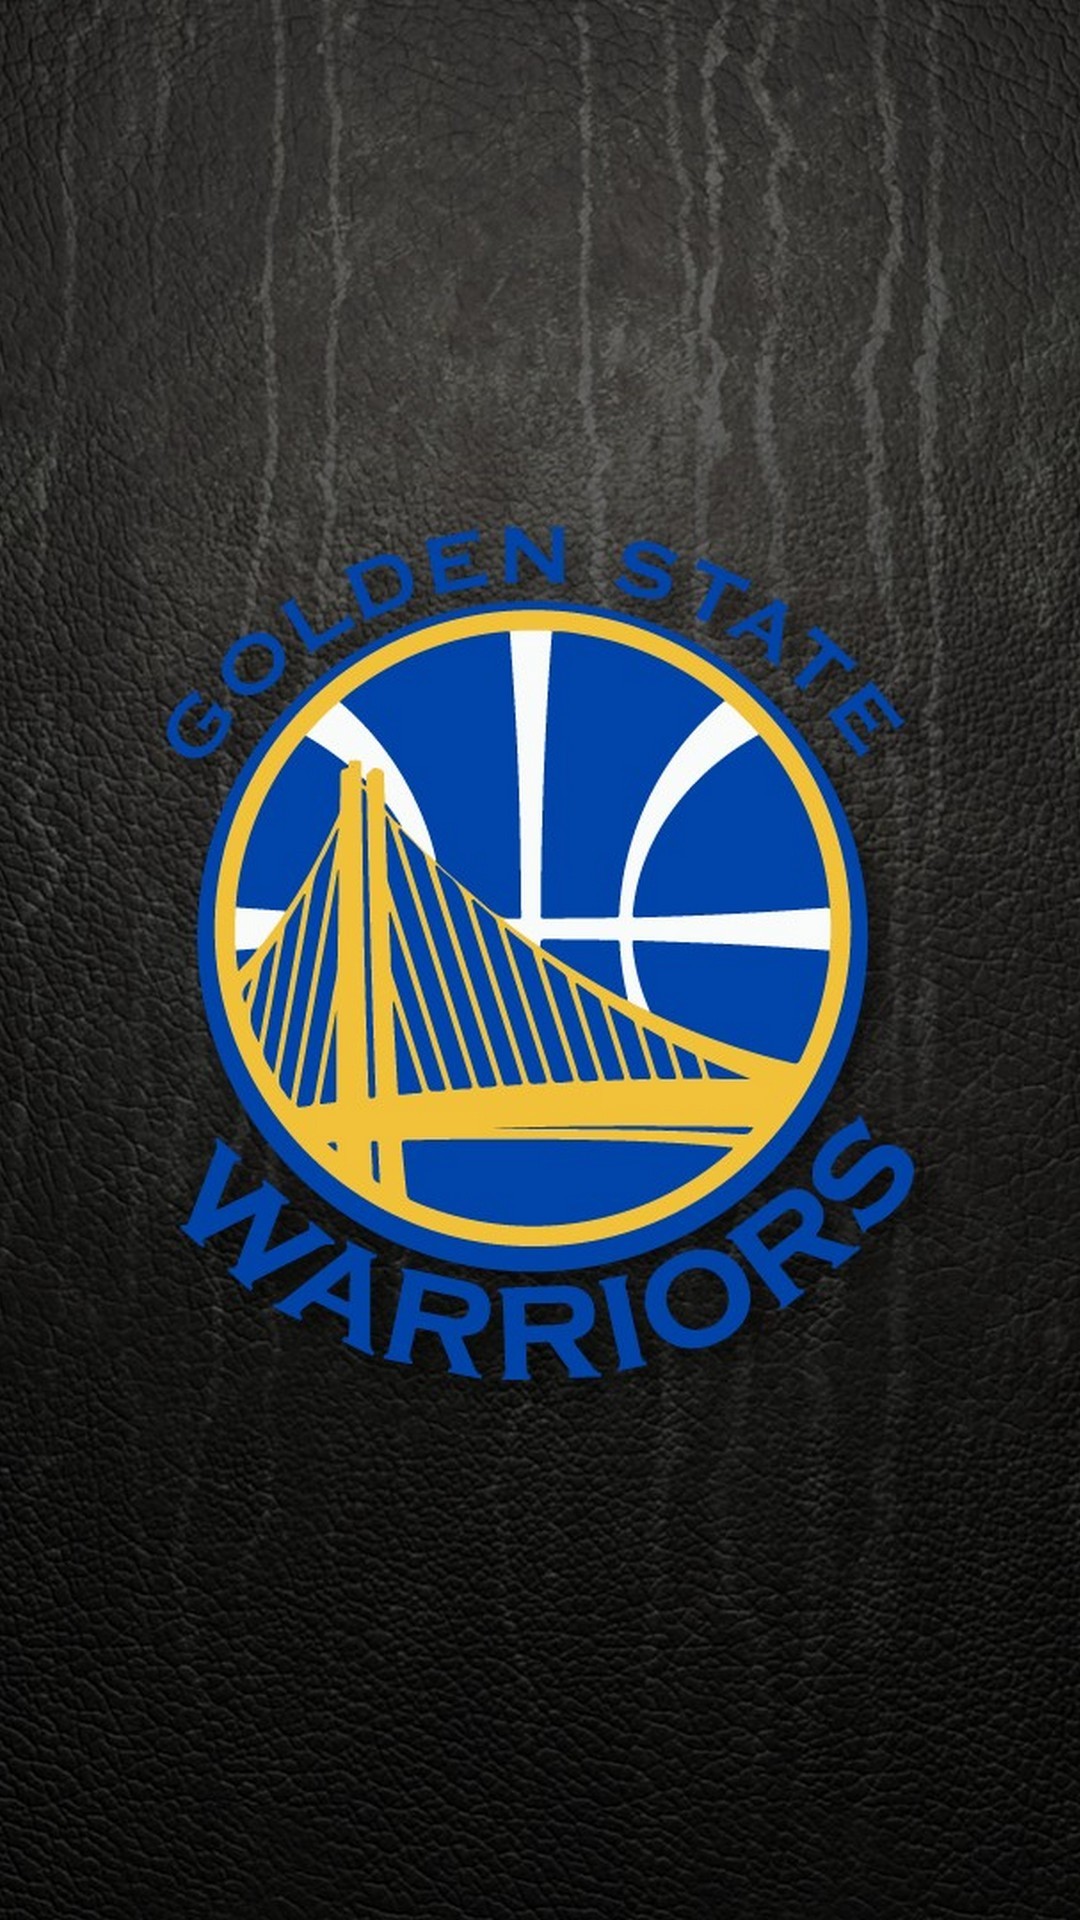 1080x1920 iPhone Wallpaper HD Golden State with image dimensions  pixel. You  can make this wallpaper